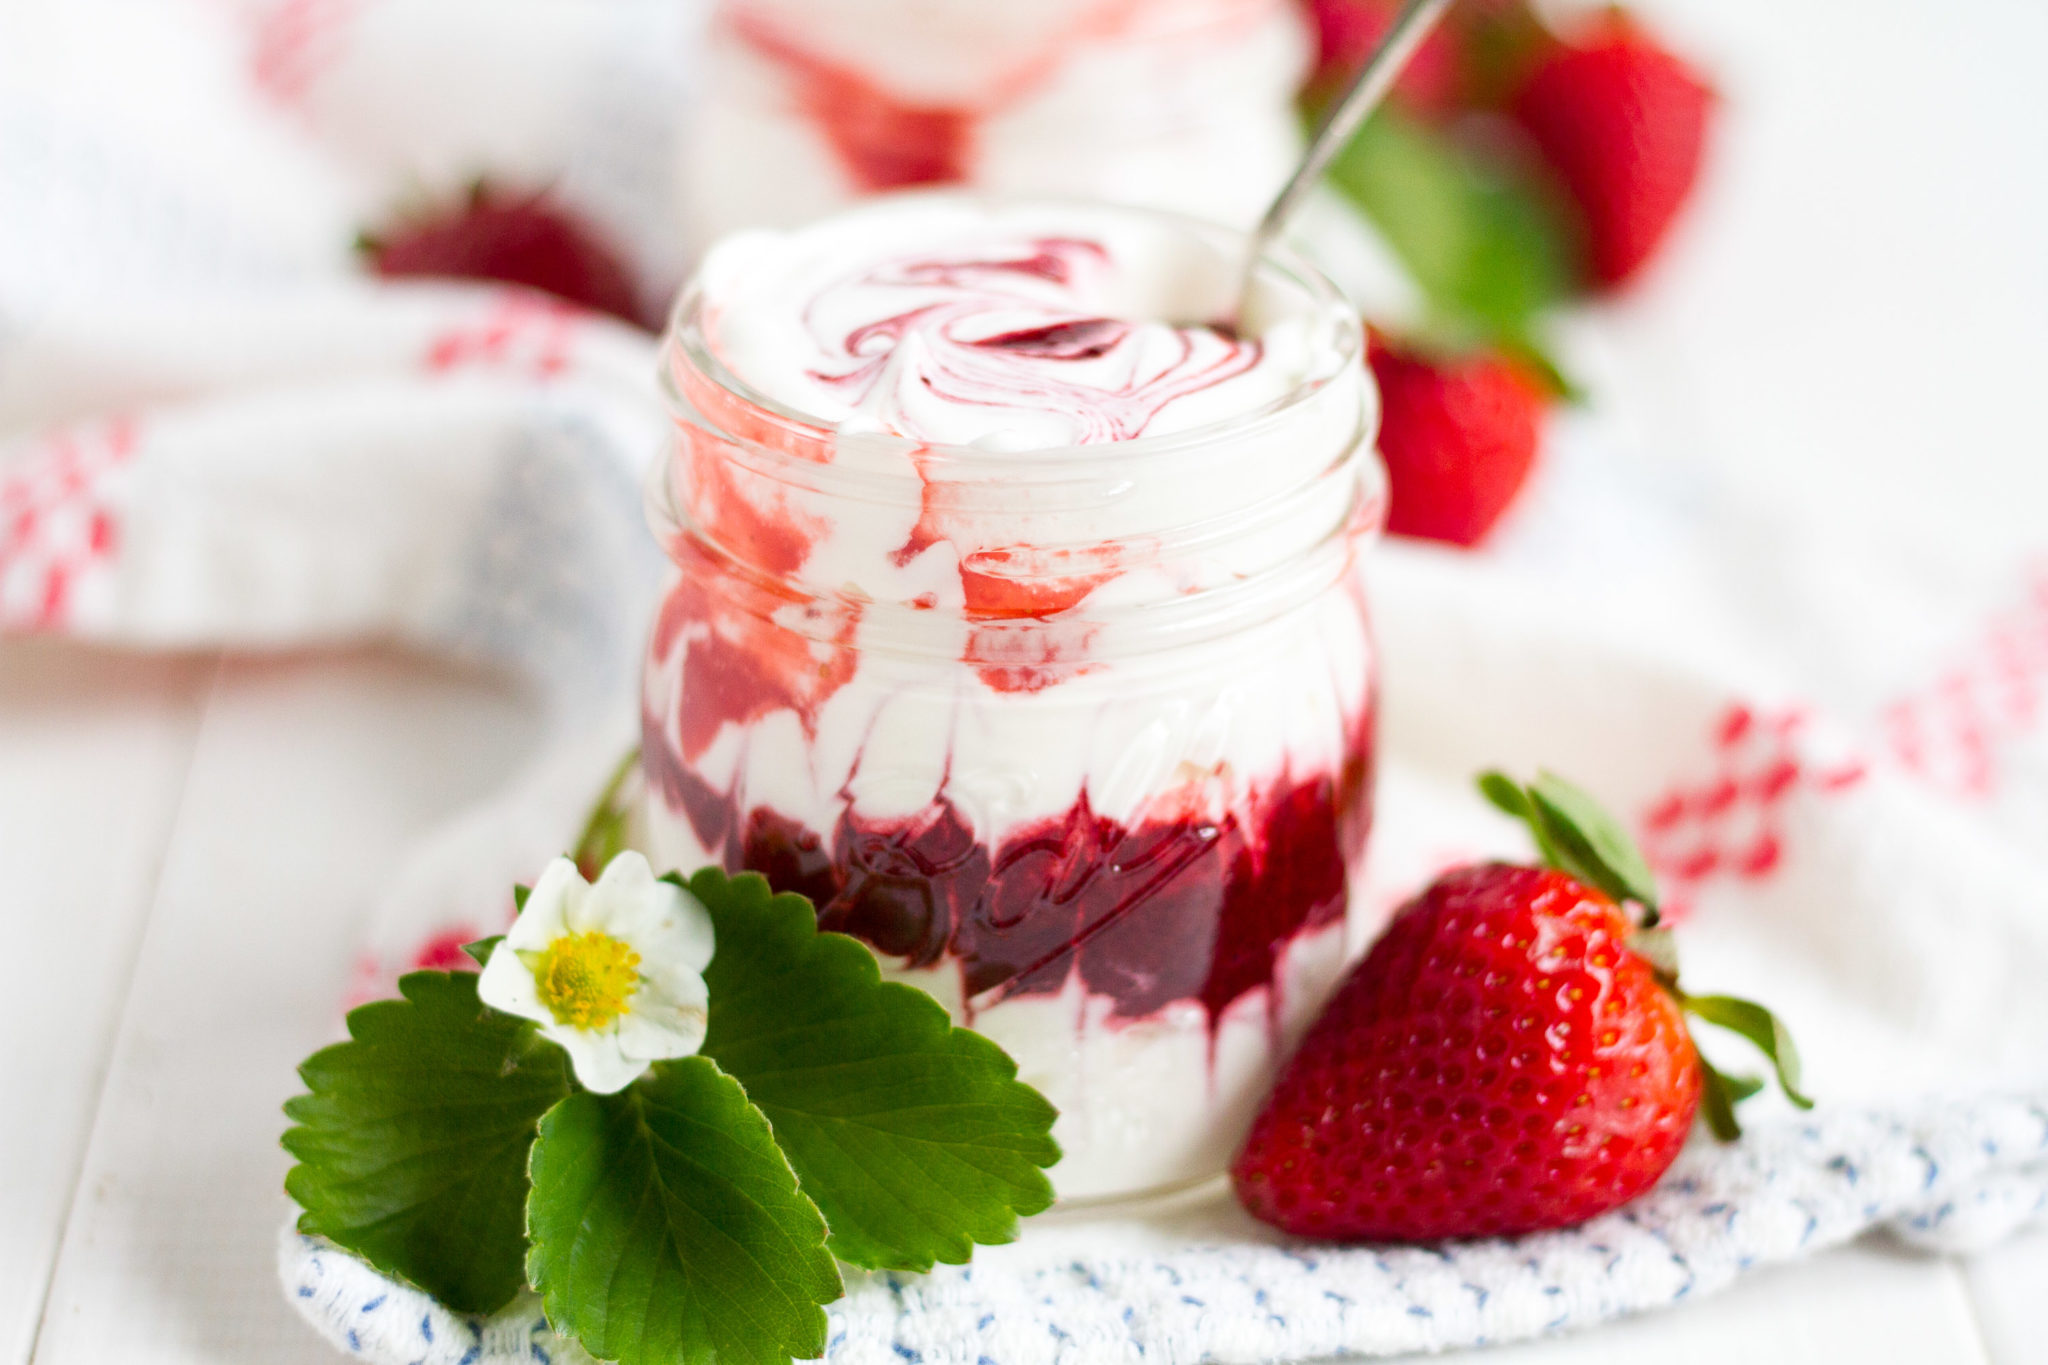 Summer Berry Fool is an easy, beautiful, and delicious dessert with just 6 ingredients.